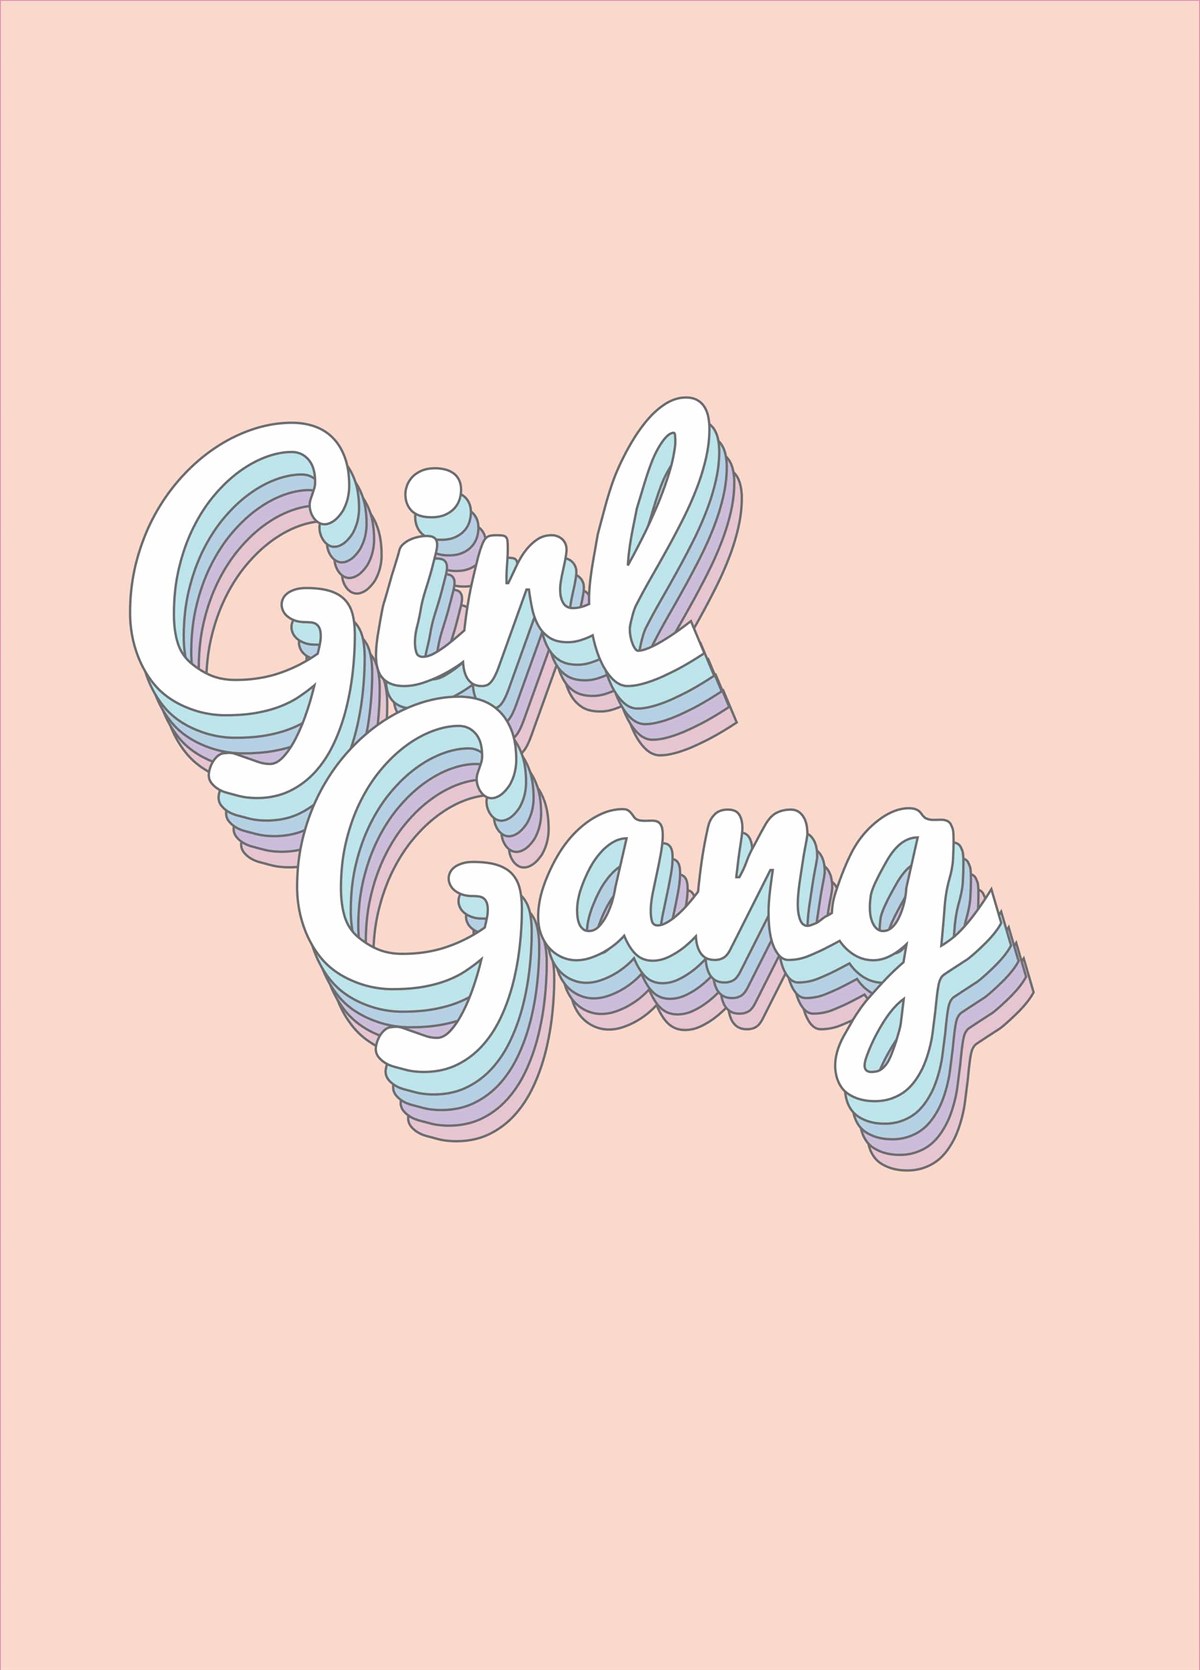 Girl Gang Stylized Typography For Posters Prints Design Stock Illustration  - Download Image Now - iStock